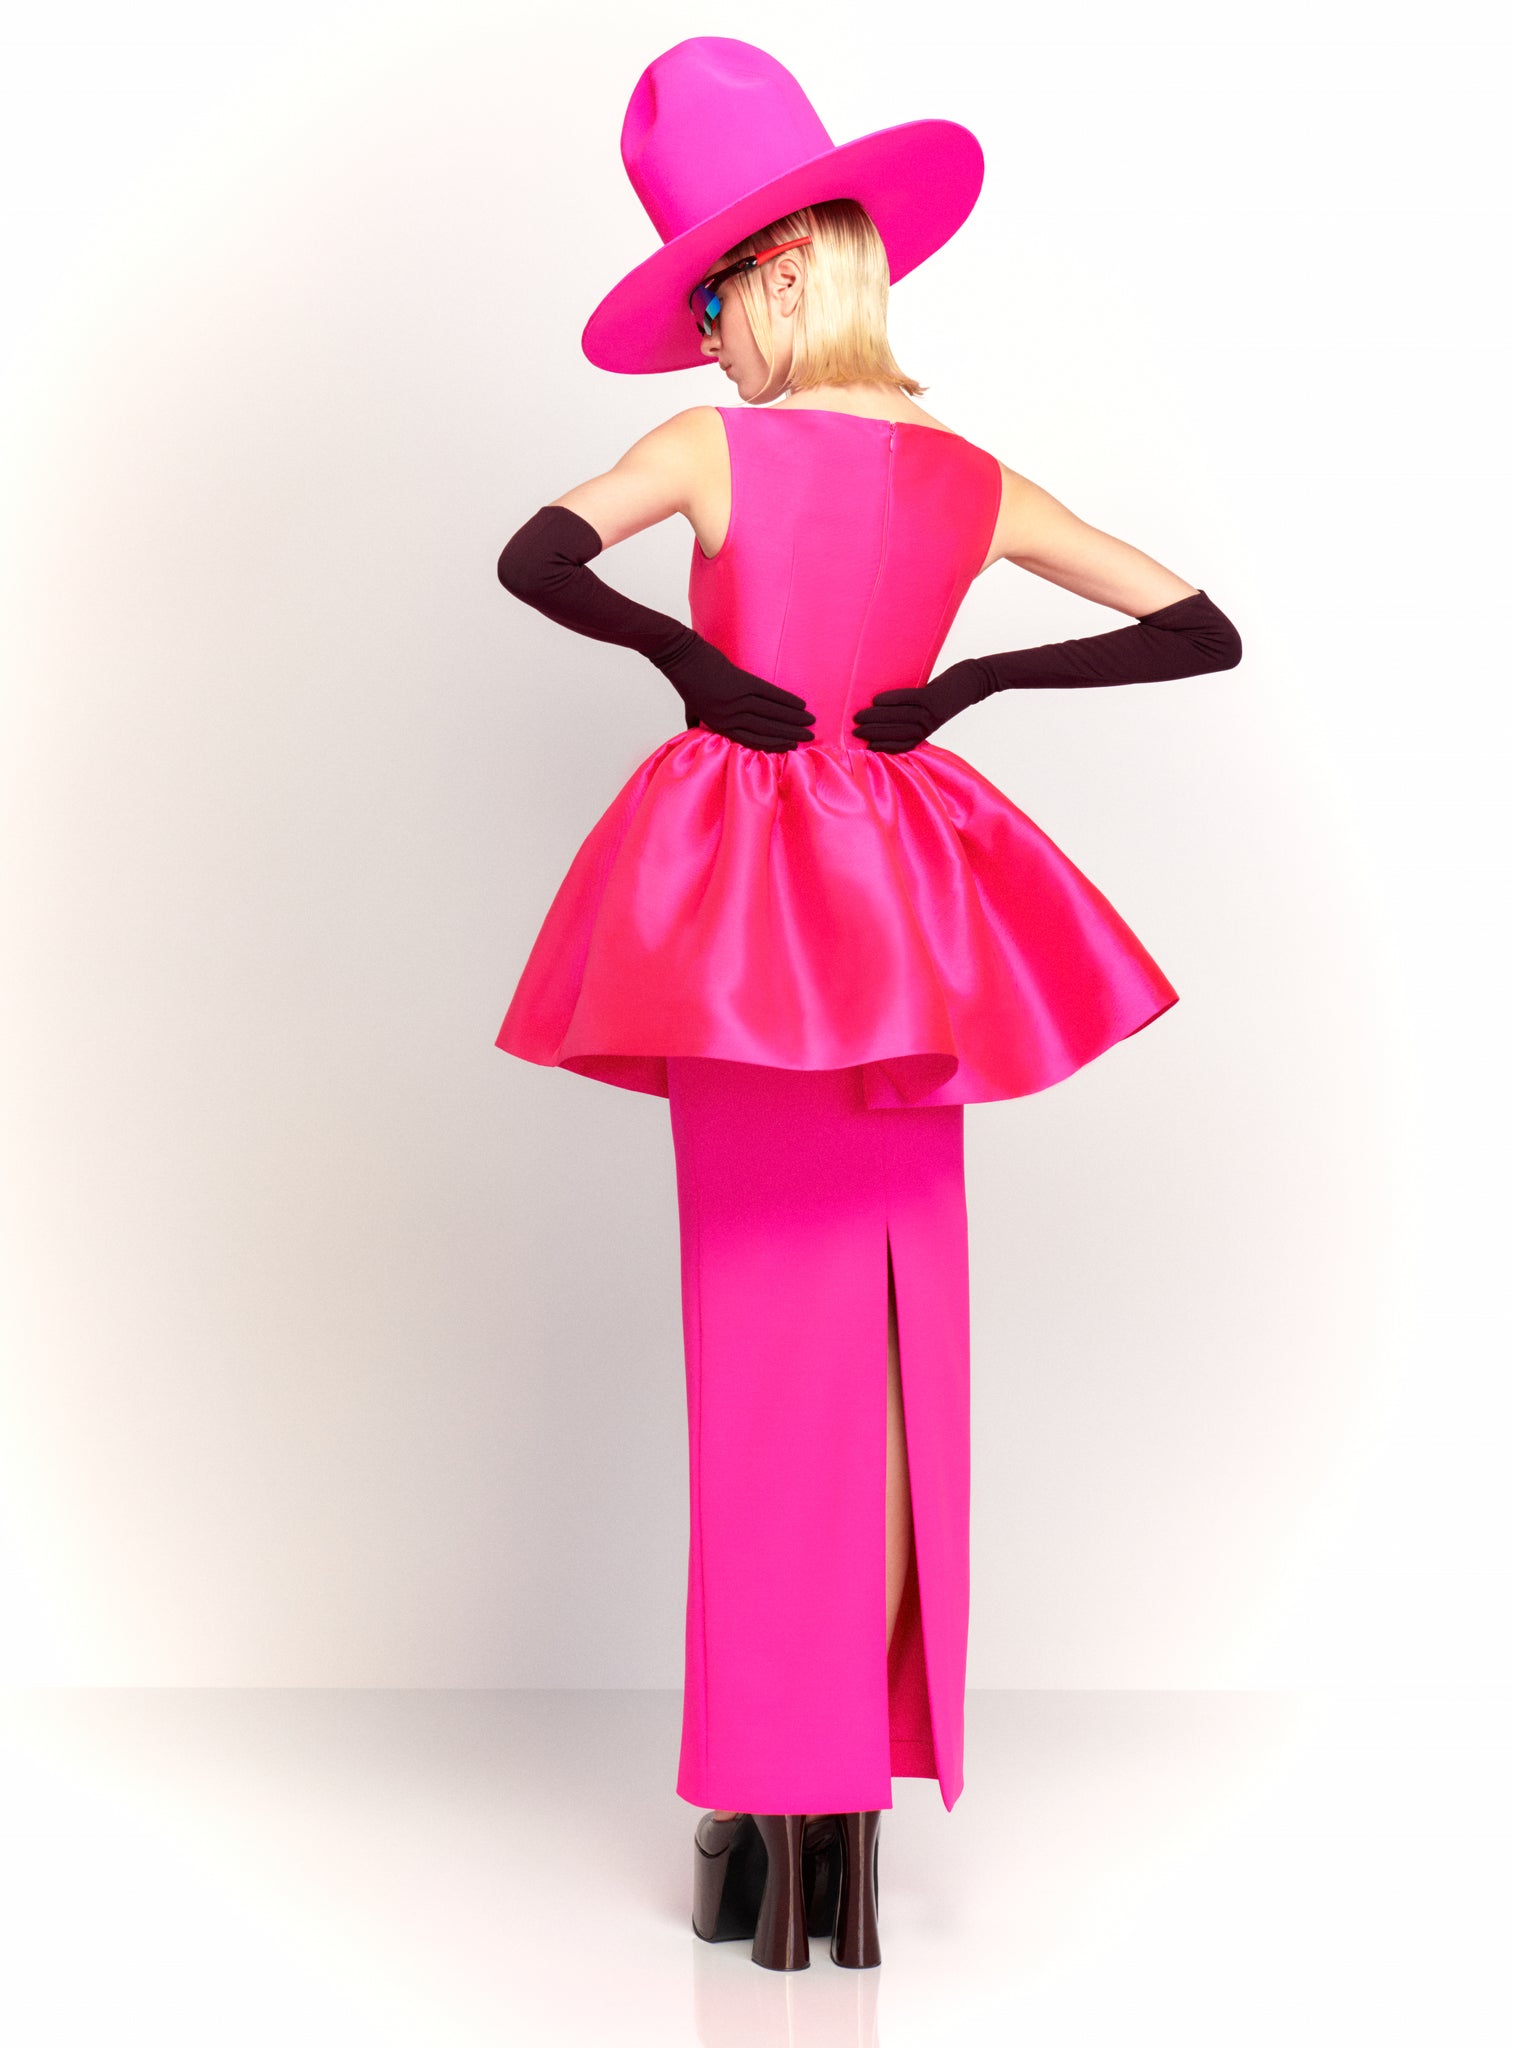 The Alda Maxi Dress in Hot Pink